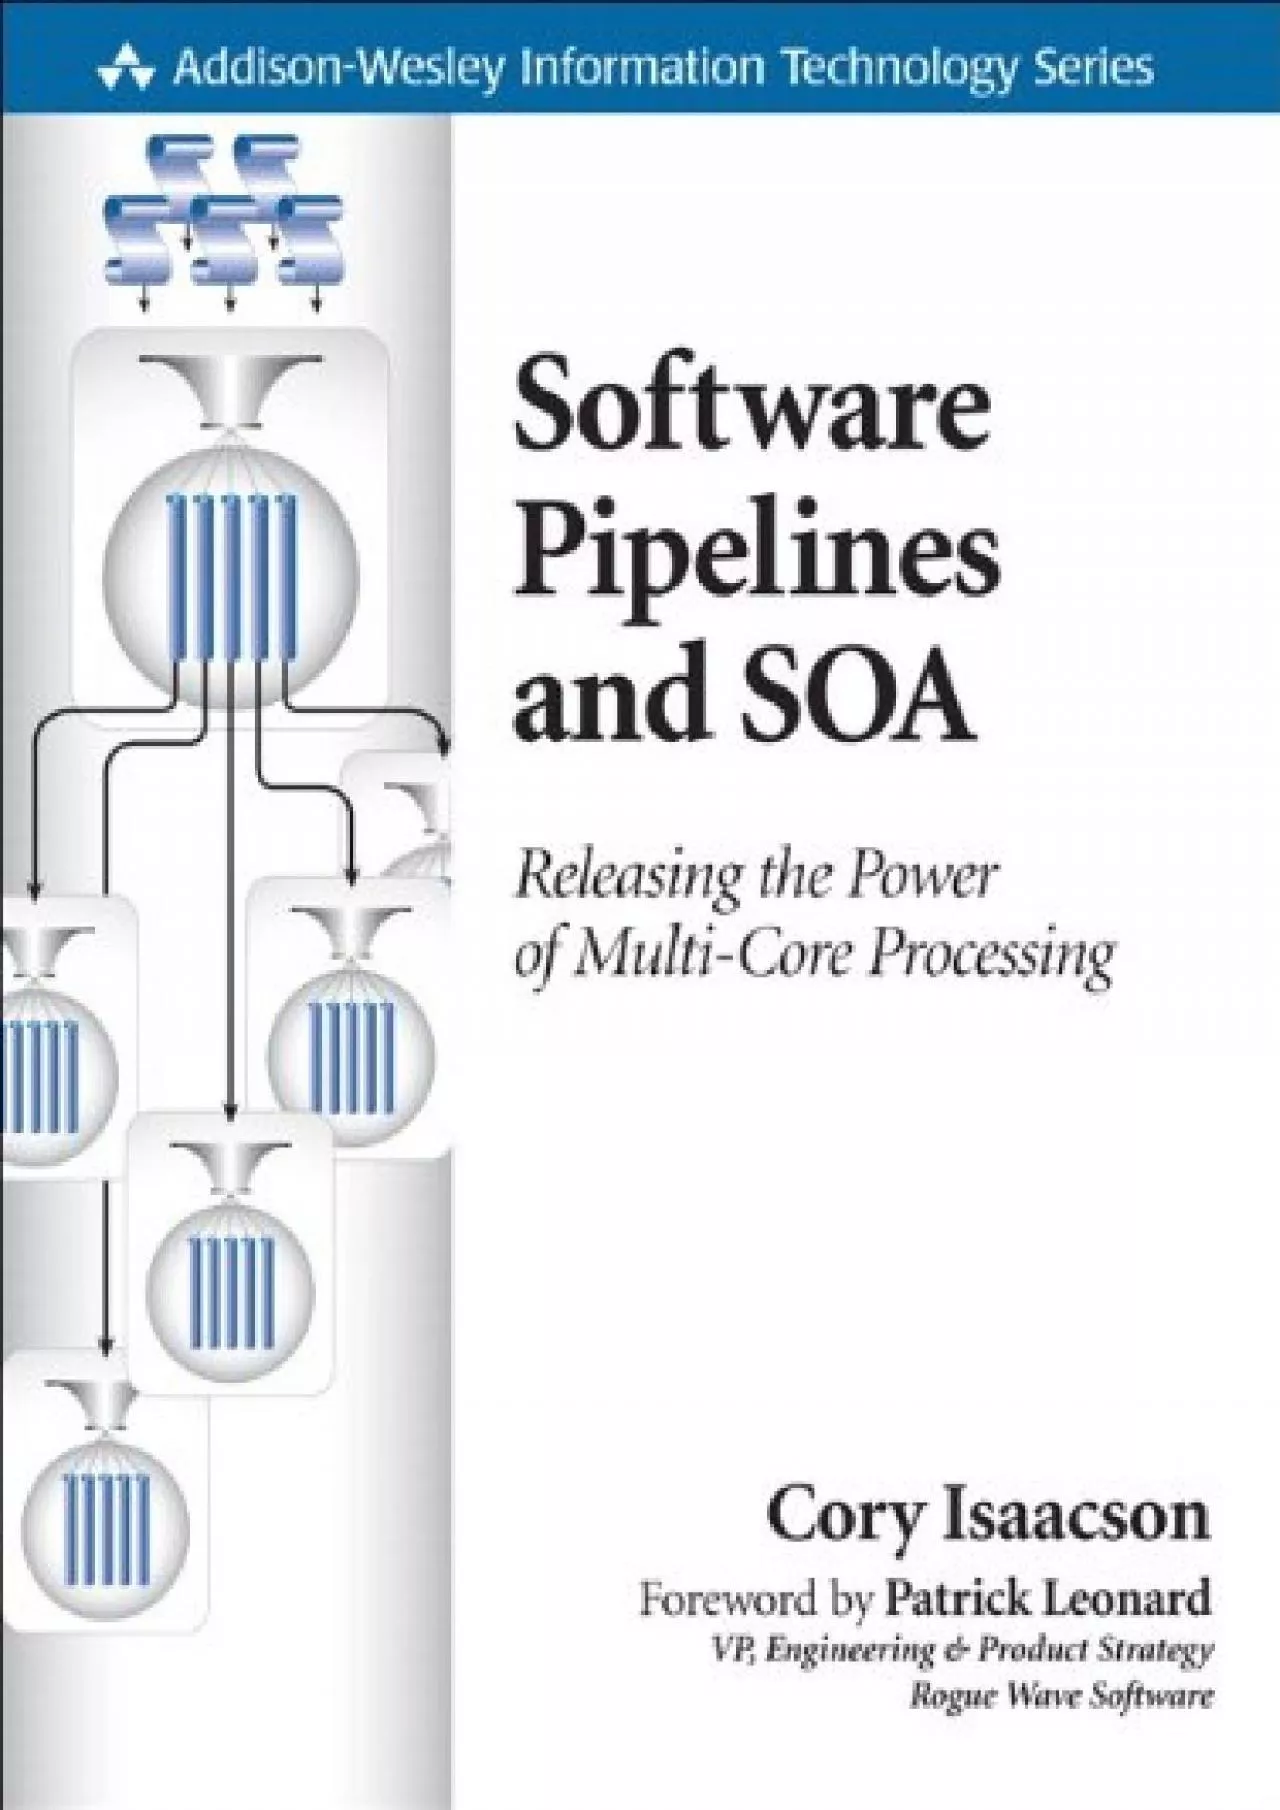 (BOOS)-Software Pipelines and SOA: Releasing the Power of Multi-Core Processing (Addison-Wesley